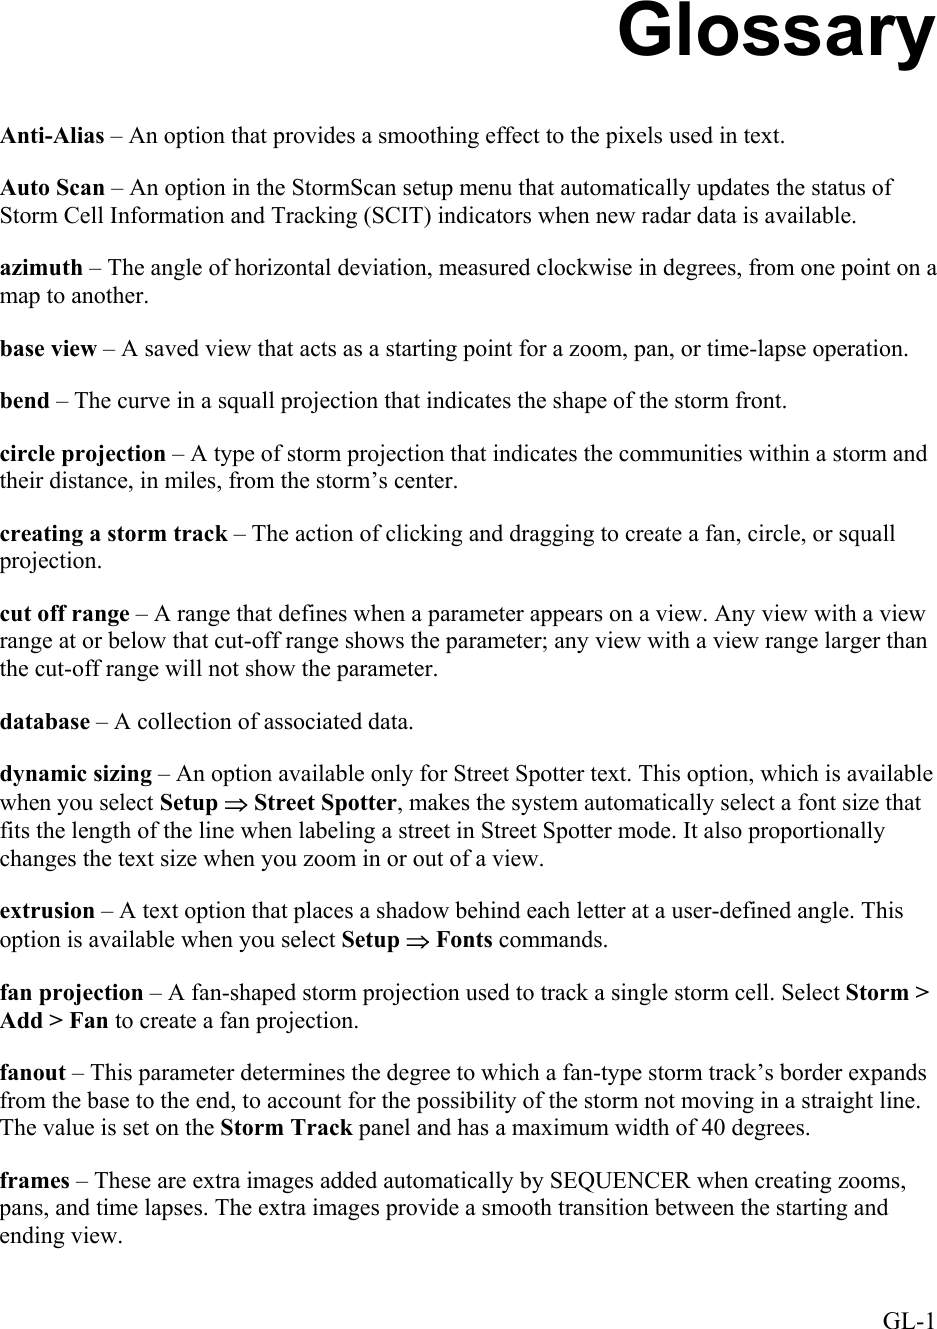  Glossary Anti-Alias – An option that provides a smoothing effect to the pixels used in text. Auto Scan – An option in the StormScan setup menu that automatically updates the status of Storm Cell Information and Tracking (SCIT) indicators when new radar data is available. azimuth – The angle of horizontal deviation, measured clockwise in degrees, from one point on a map to another. base view – A saved view that acts as a starting point for a zoom, pan, or time-lapse operation. bend – The curve in a squall projection that indicates the shape of the storm front. circle projection – A type of storm projection that indicates the communities within a storm and their distance, in miles, from the storm’s center. creating a storm track – The action of clicking and dragging to create a fan, circle, or squall projection. cut off range – A range that defines when a parameter appears on a view. Any view with a view range at or below that cut-off range shows the parameter; any view with a view range larger than the cut-off range will not show the parameter. database – A collection of associated data. dynamic sizing – An option available only for Street Spotter text. This option, which is available when you select Setup ⇒ Street Spotter, makes the system automatically select a font size that fits the length of the line when labeling a street in Street Spotter mode. It also proportionally changes the text size when you zoom in or out of a view.  extrusion – A text option that places a shadow behind each letter at a user-defined angle. This option is available when you select Setup ⇒ Fonts commands. fan projection – A fan-shaped storm projection used to track a single storm cell. Select Storm &gt; Add &gt; Fan to create a fan projection. fanout – This parameter determines the degree to which a fan-type storm track’s border expands from the base to the end, to account for the possibility of the storm not moving in a straight line. The value is set on the Storm Track panel and has a maximum width of 40 degrees. frames – These are extra images added automatically by SEQUENCER when creating zooms, pans, and time lapses. The extra images provide a smooth transition between the starting and ending view.  GL-1